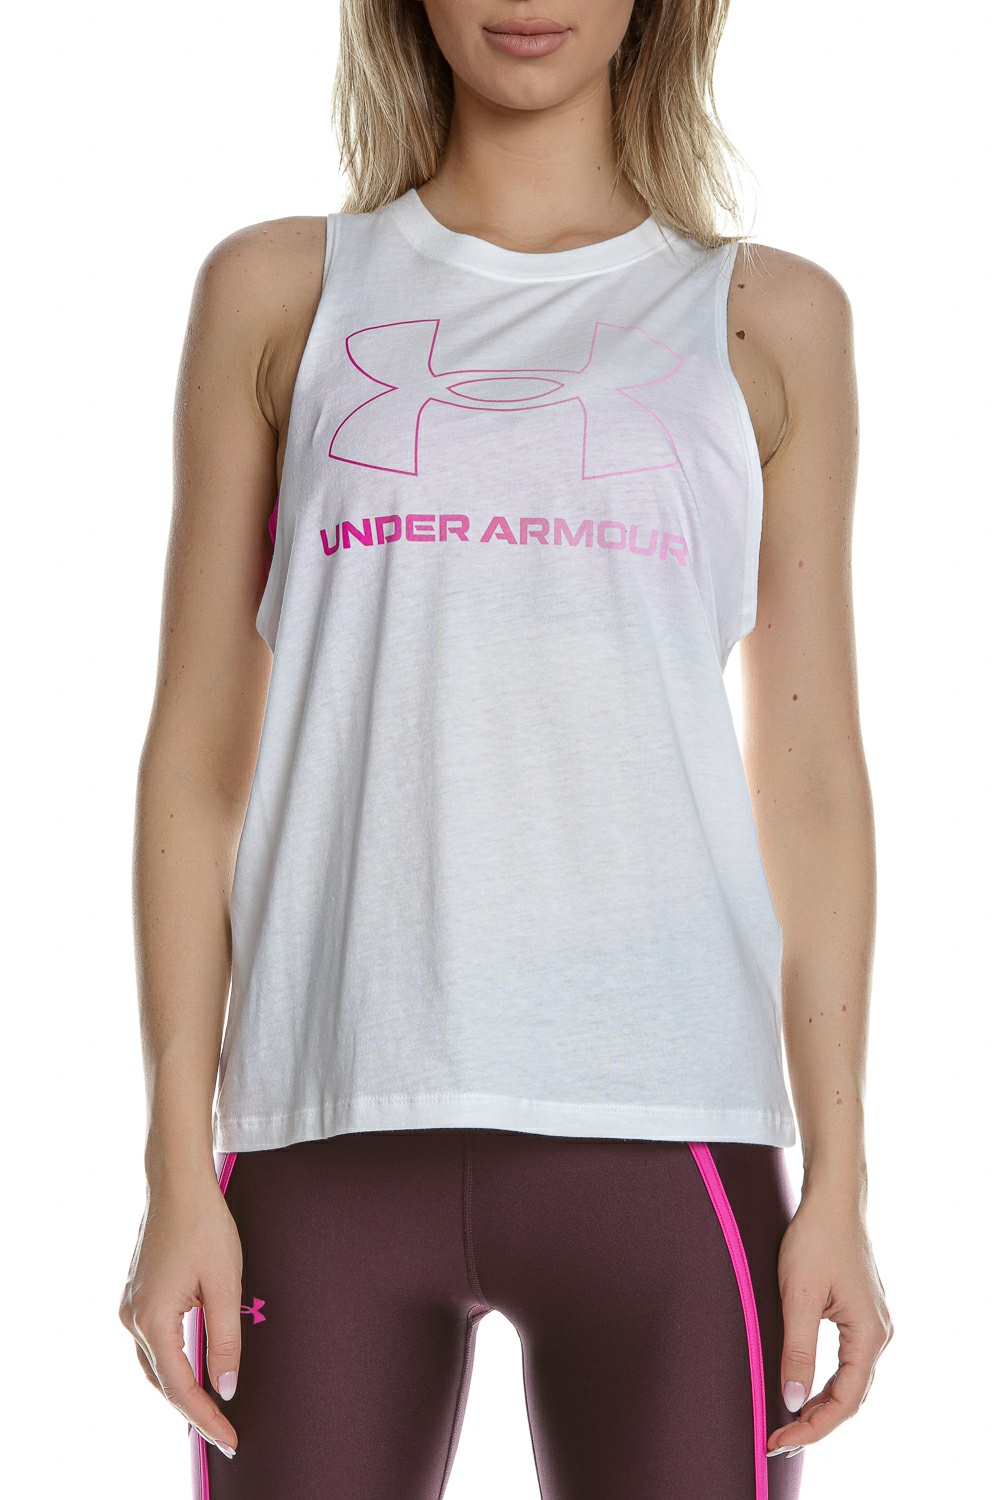 UNDER ARMOUR – Γυναικείο top UNDER ARMOUR Live Sportstyle Graphic Tank λευκή 1808336.0-71B6